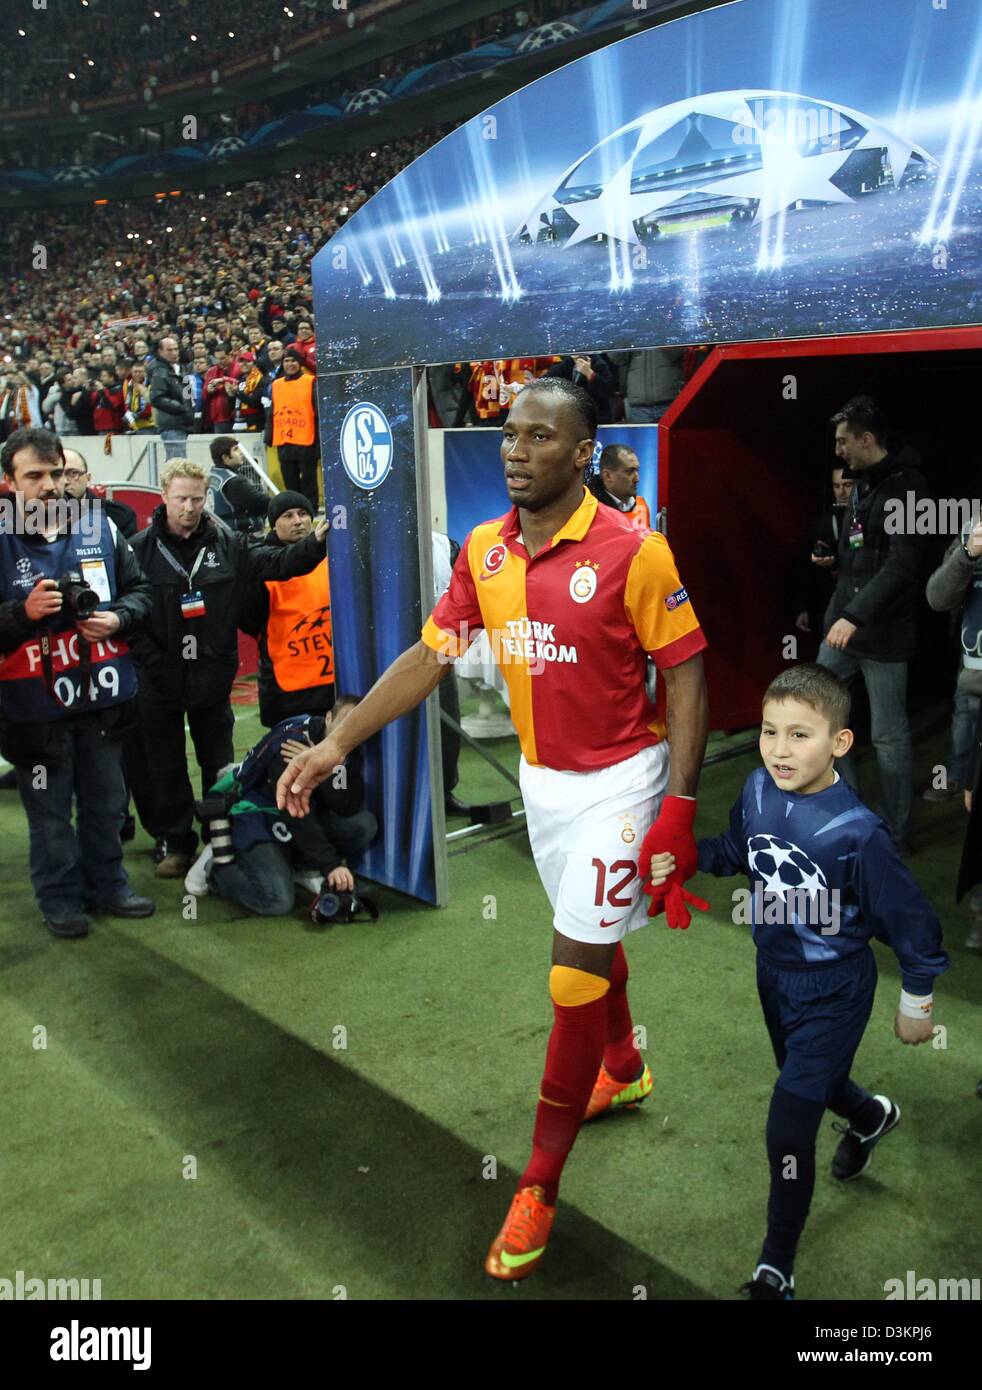 Galatasaray's Didier Drogba enters the pitch prior to the UEFA Champions League round of 16 first leg soccer match between Galatasaray Istanbul and FC Schalke 04 at Ali Sami Yen Spor Kompleksi stadium in Istanbul, Turkey, 20 February 2013. Photo: Friso Gentsch/dpa Stock Photo